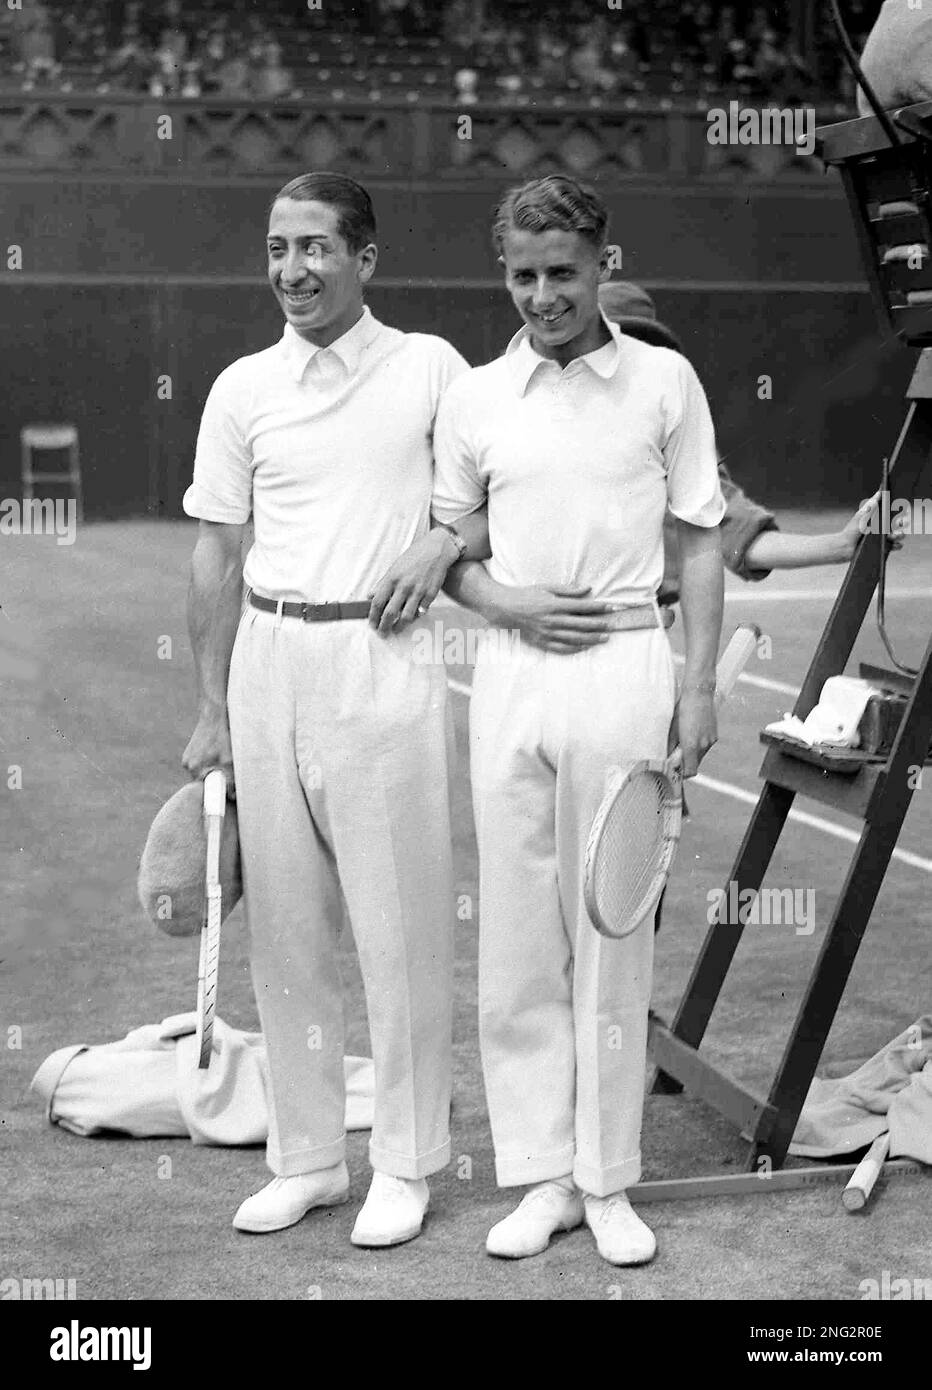 French tennis champion Rene Lacoste, left, and England's Henry W. Austin  after their Wimbledon Men's Singles Championship match, London, June 30,  1928. Lacoste won the match 6-4, 6-4, 6-8, 1-6, 6-2. (AP Photo Photo Stock  - Alamy